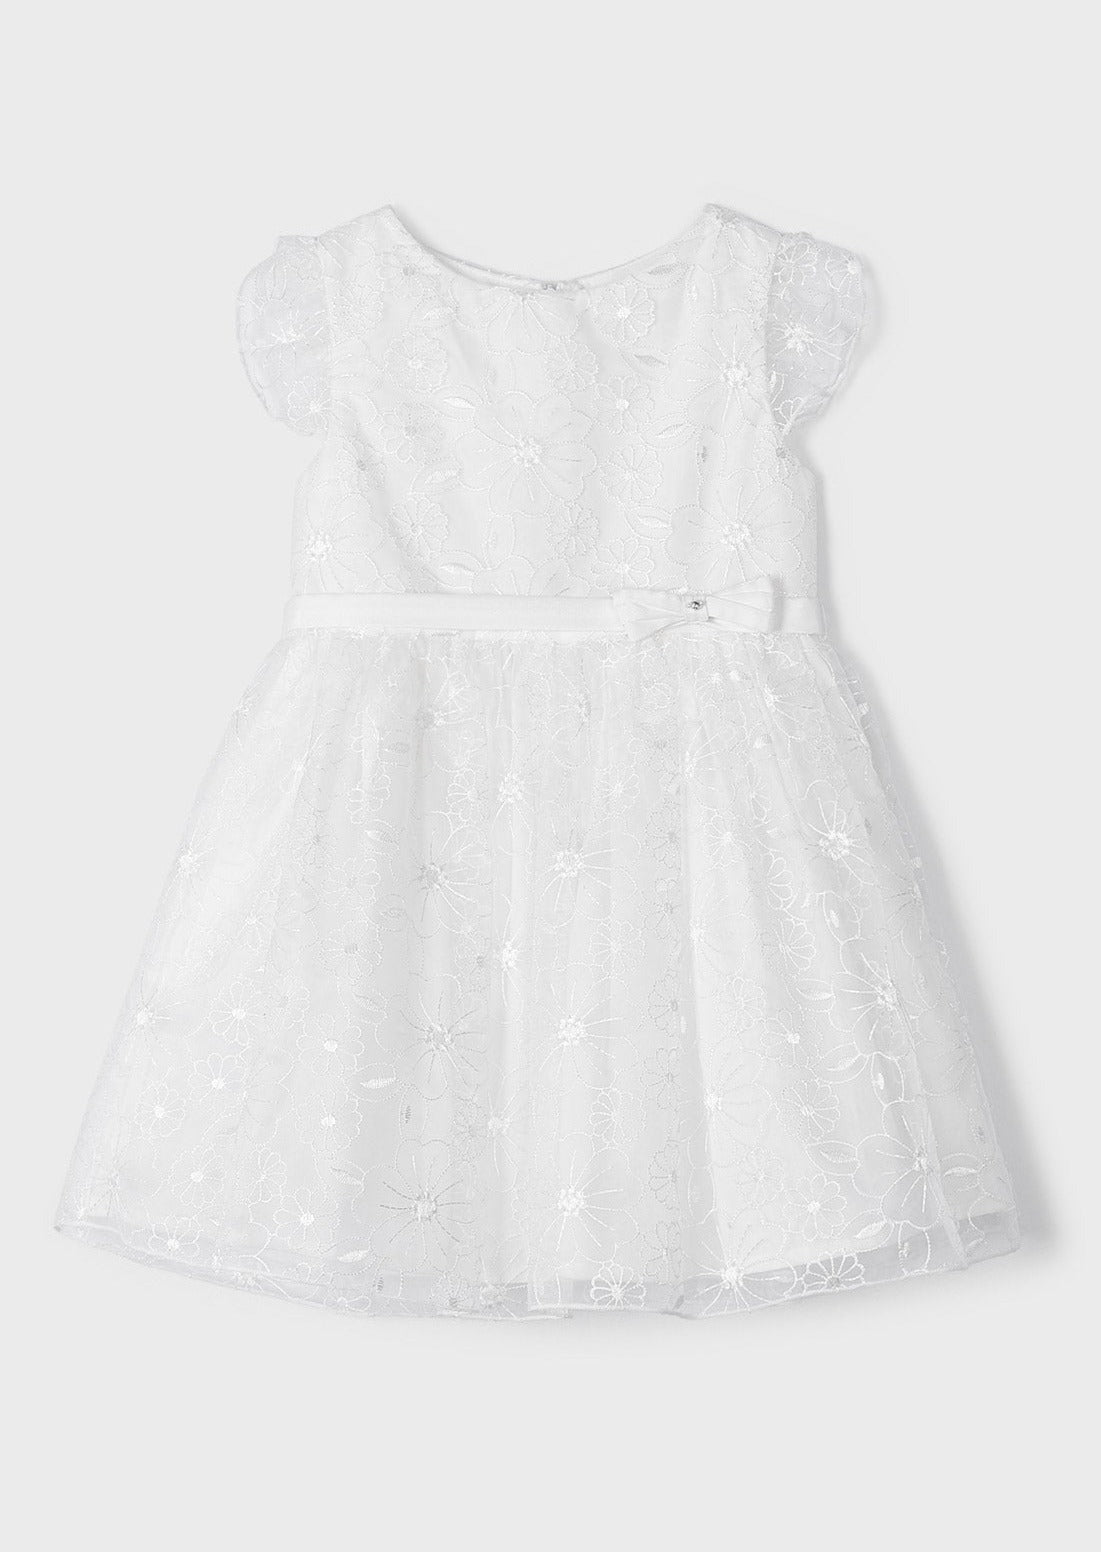 Mayoral Mini Cap Sleeve Dress w/Floral Lace Overlay _White 3911-14